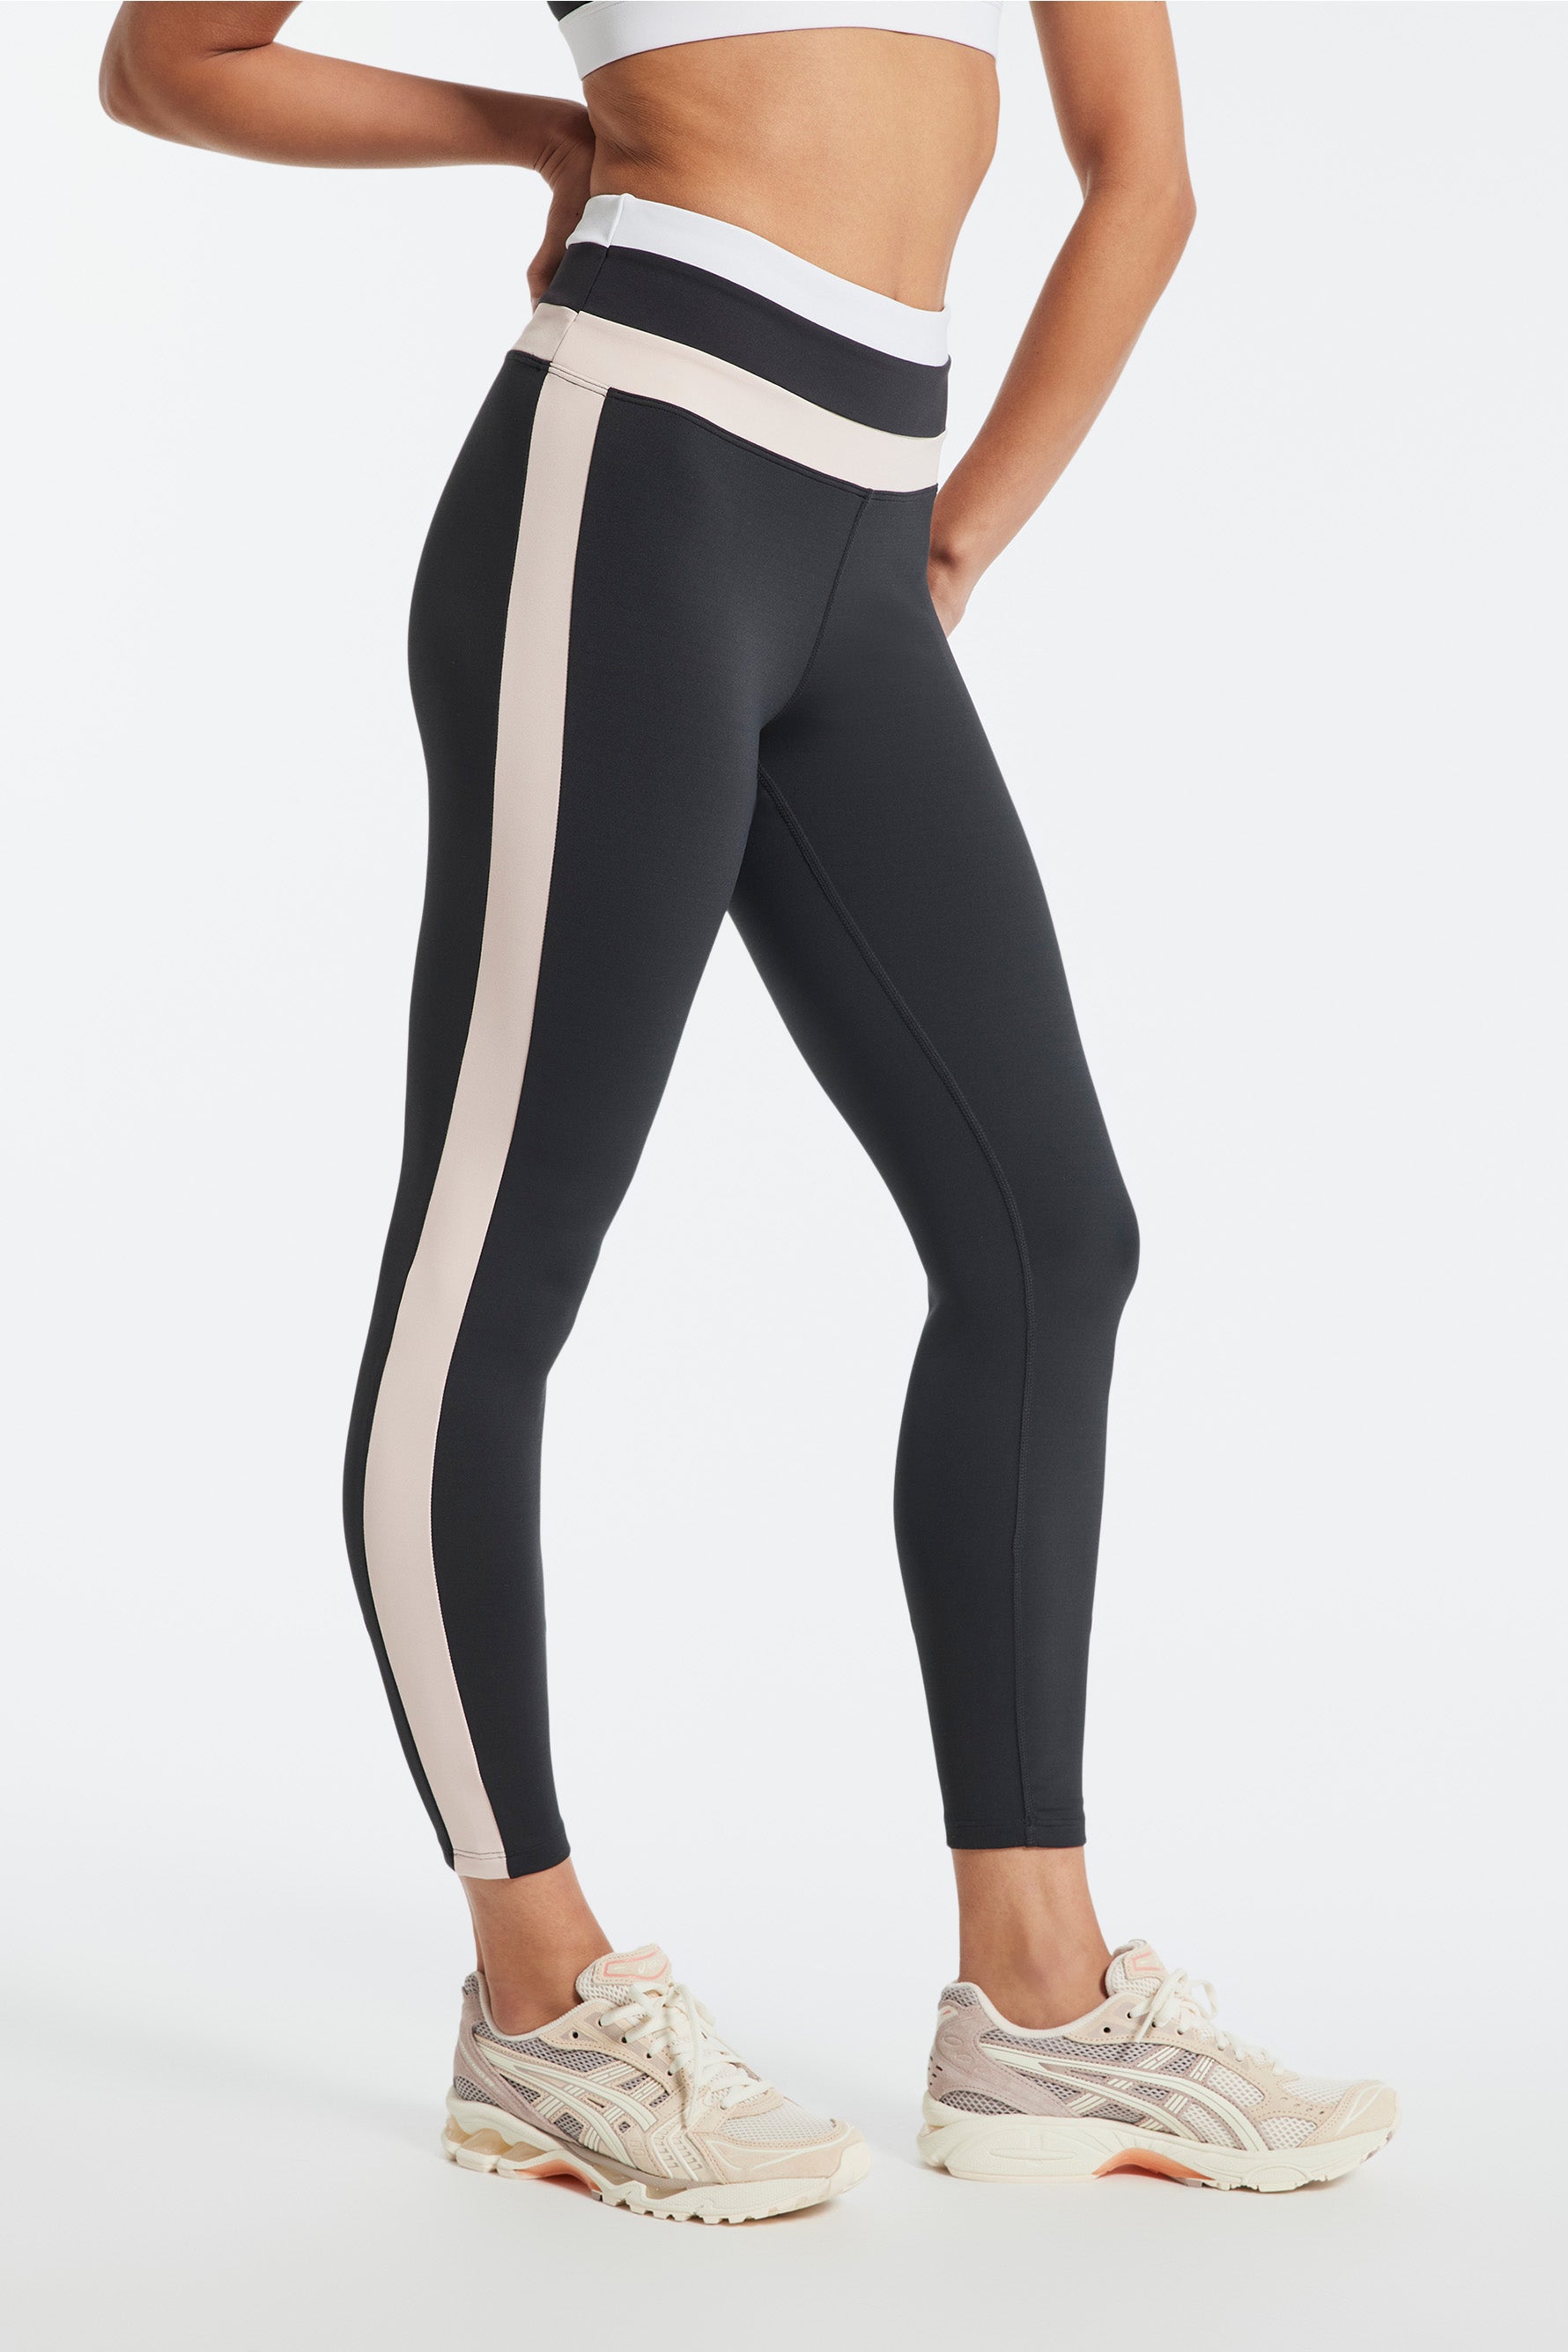 IVL Collective Scallop Active Legging- Pink Yarrow, 4- NWT! Bandier Leggings